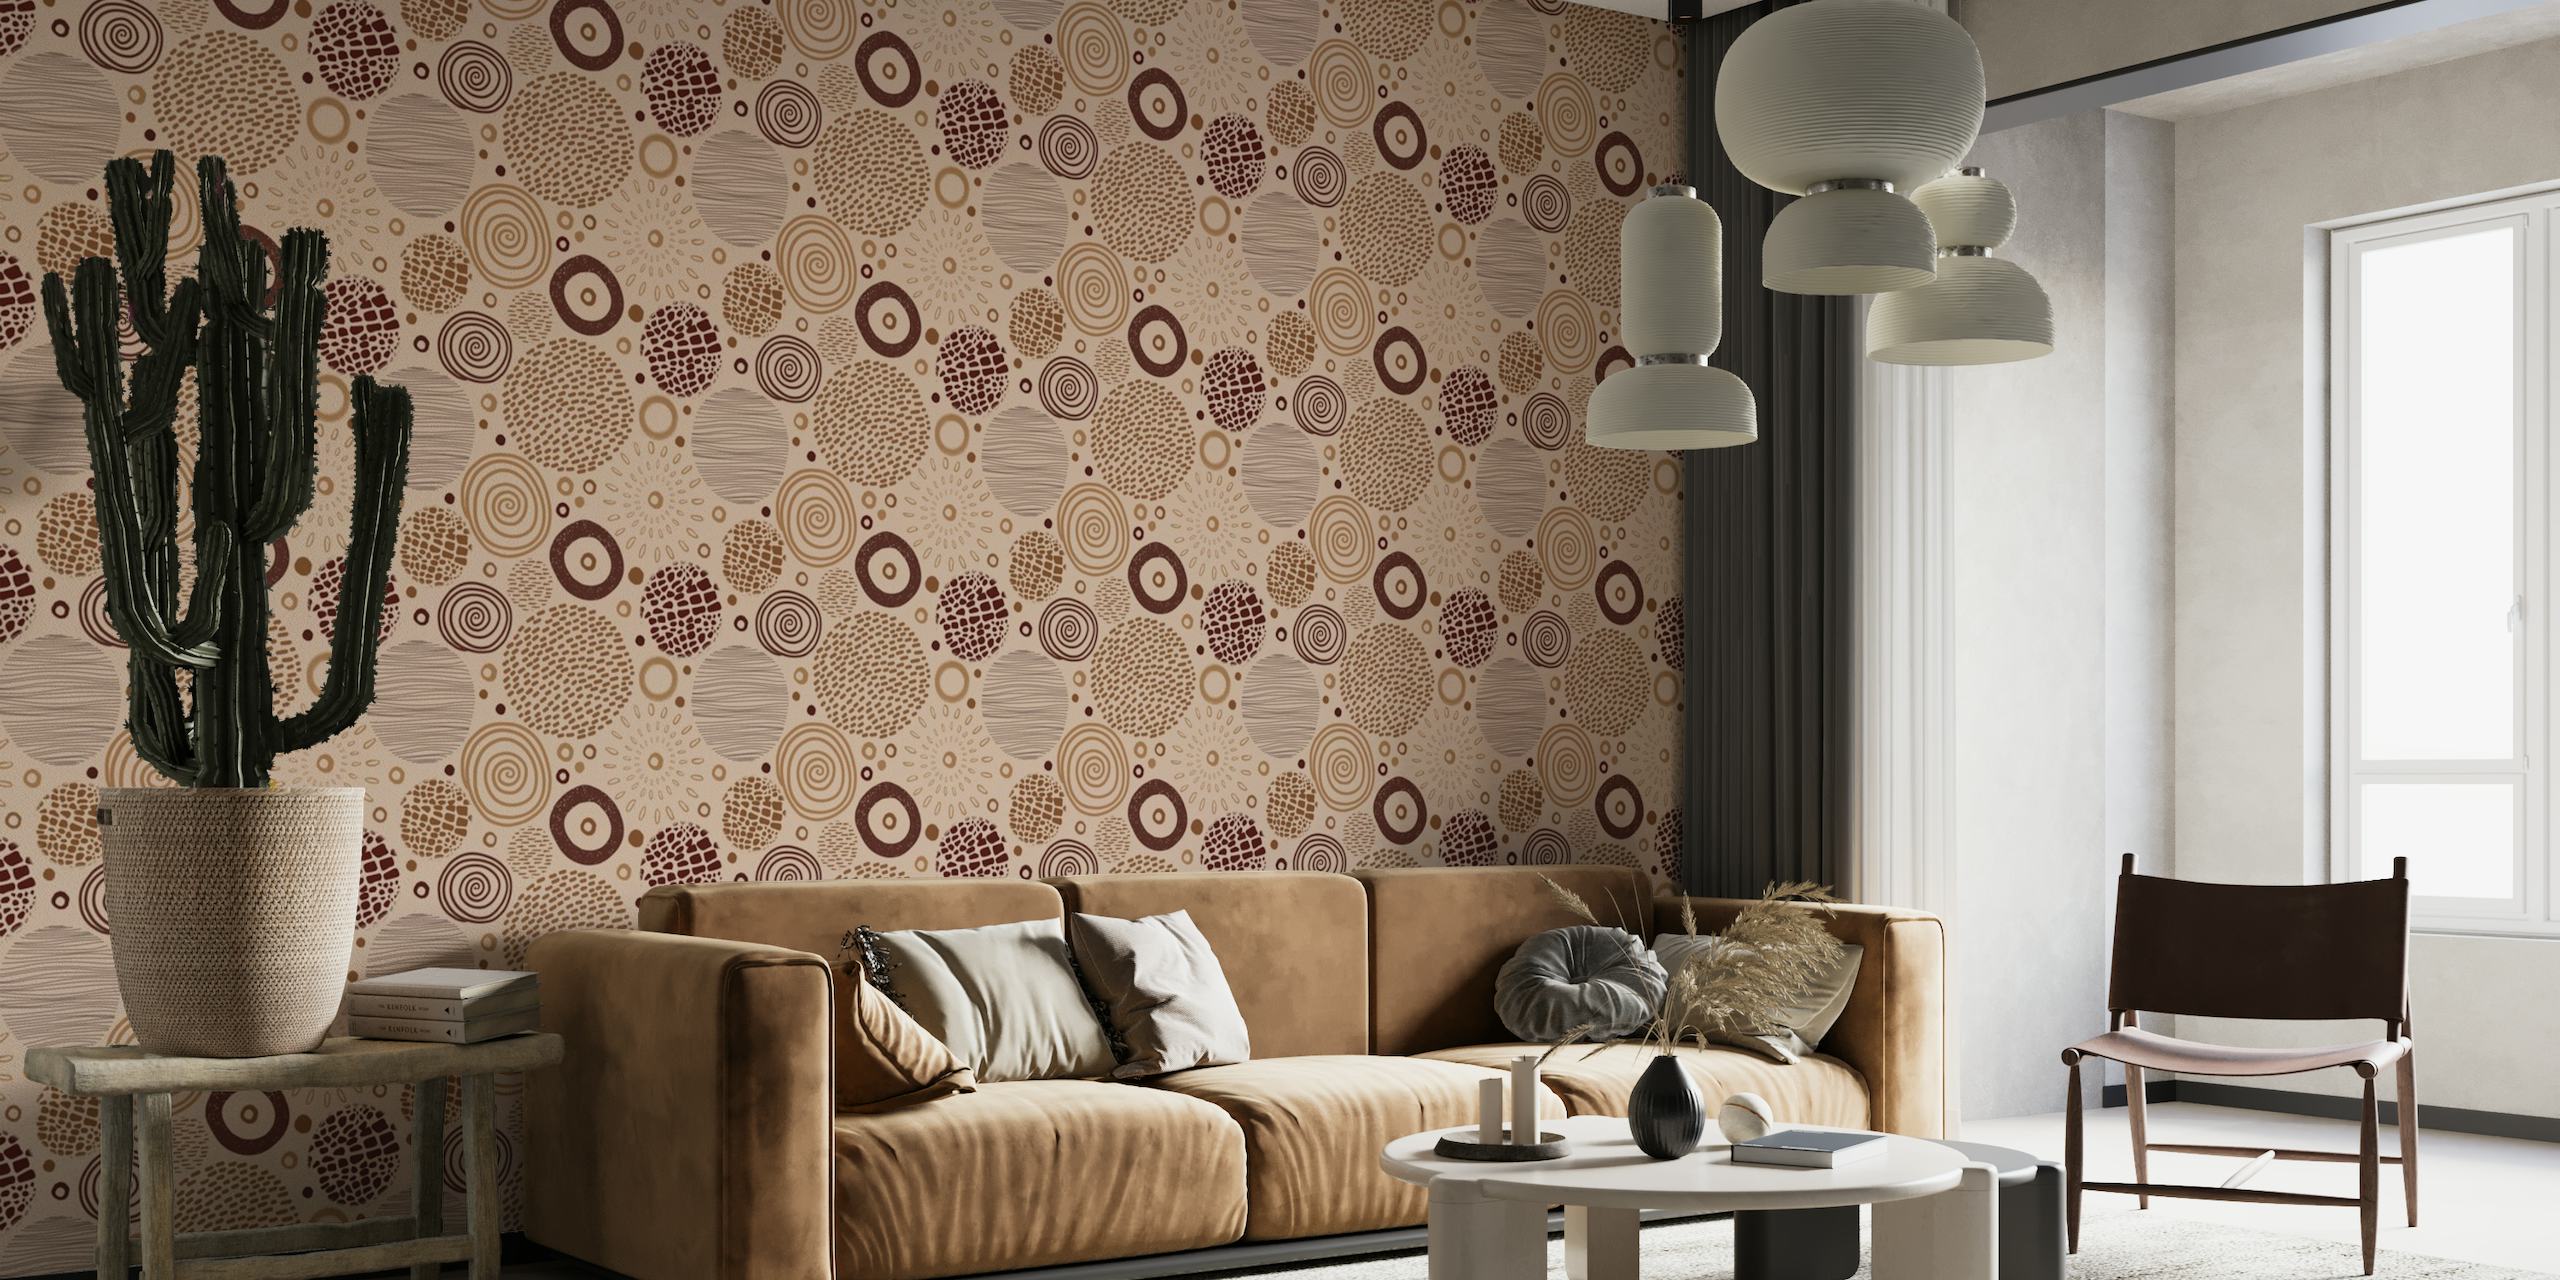 Tribal pattern wall mural with earth tone circles and dots